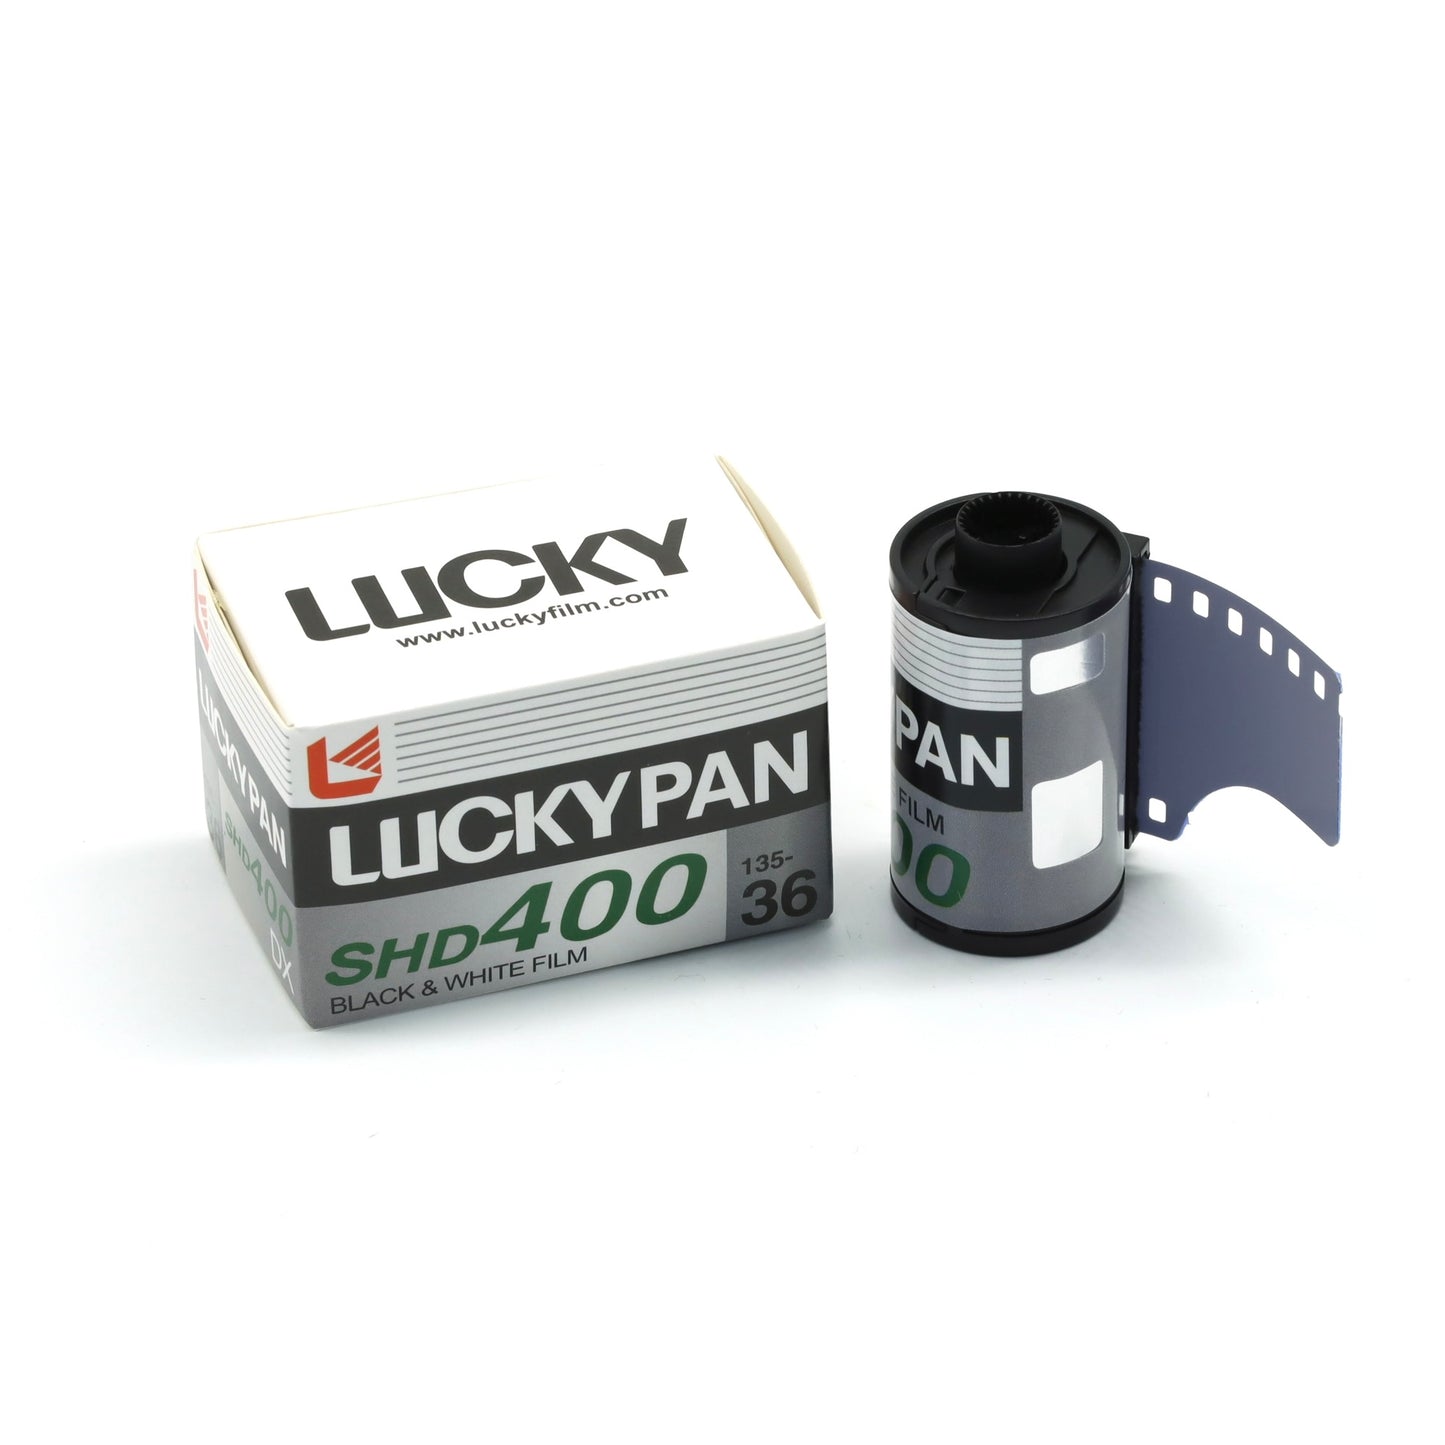 Lucky Pan SHD400 35mm Black and White Film 36EXP